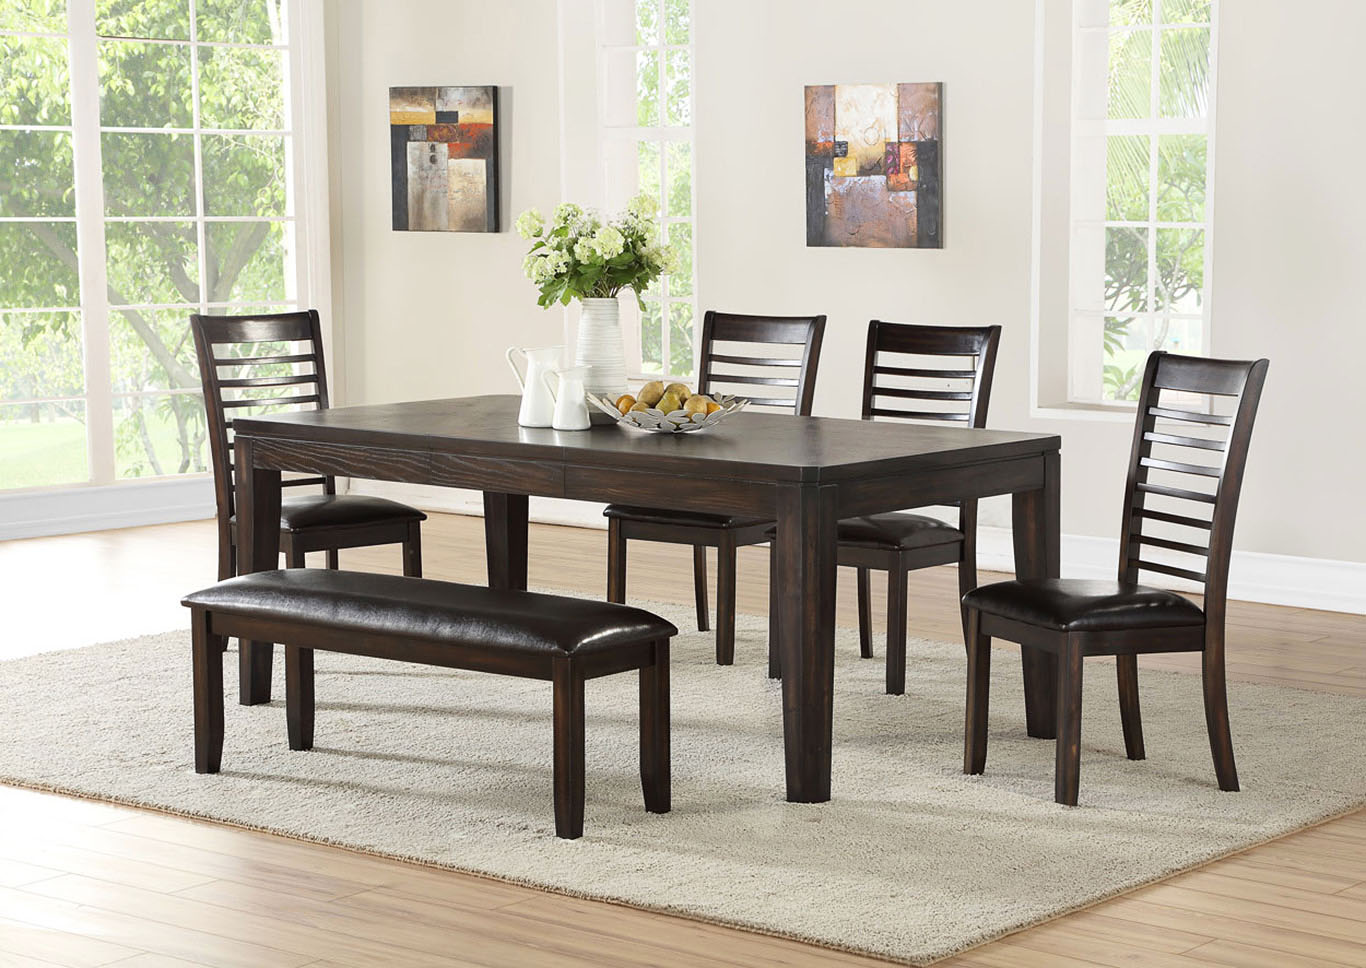 Ally Brown Dining Set W/ 4 Chairs & Bench,Steve Silver